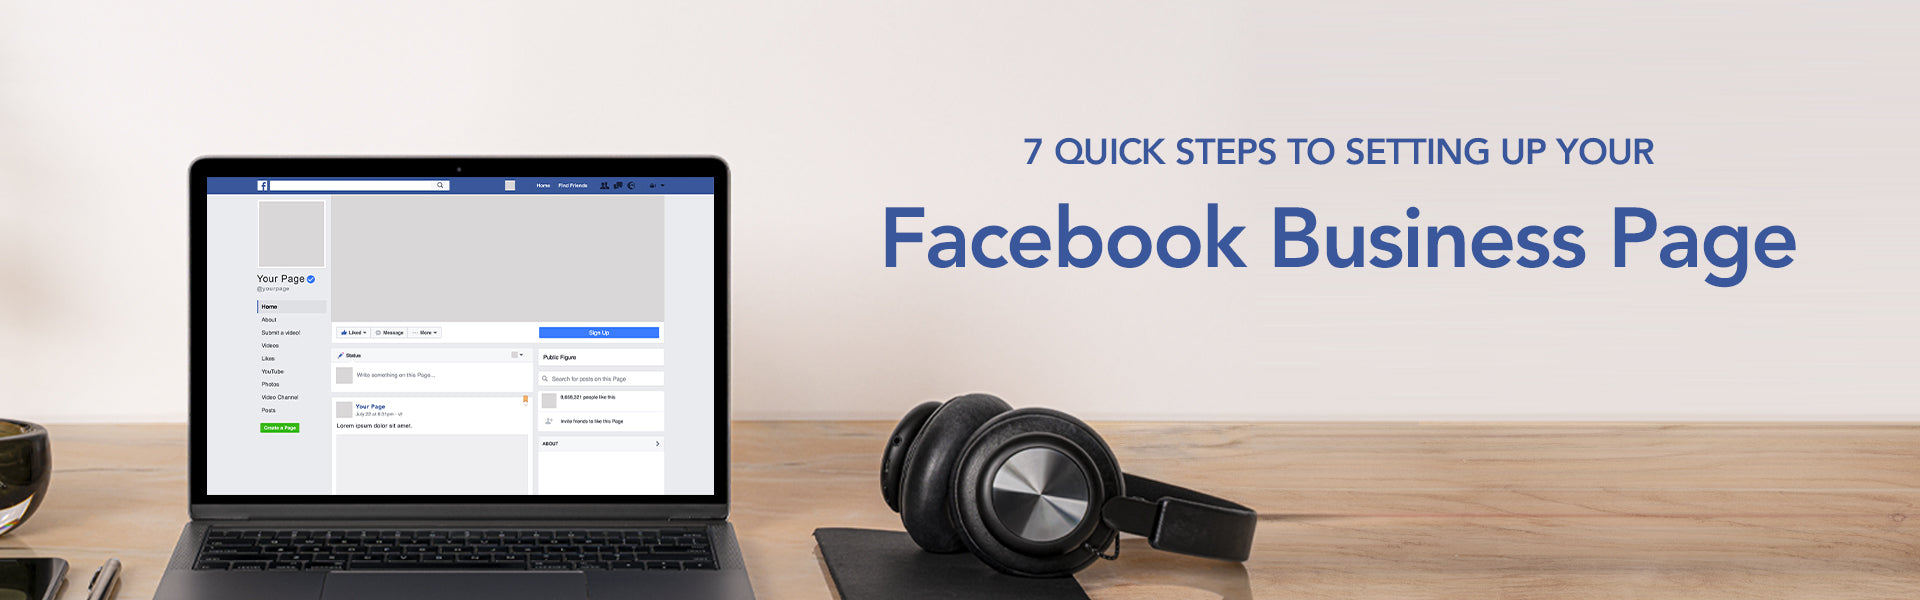 7 Quick Steps to Setting up Your Facebook Business Page